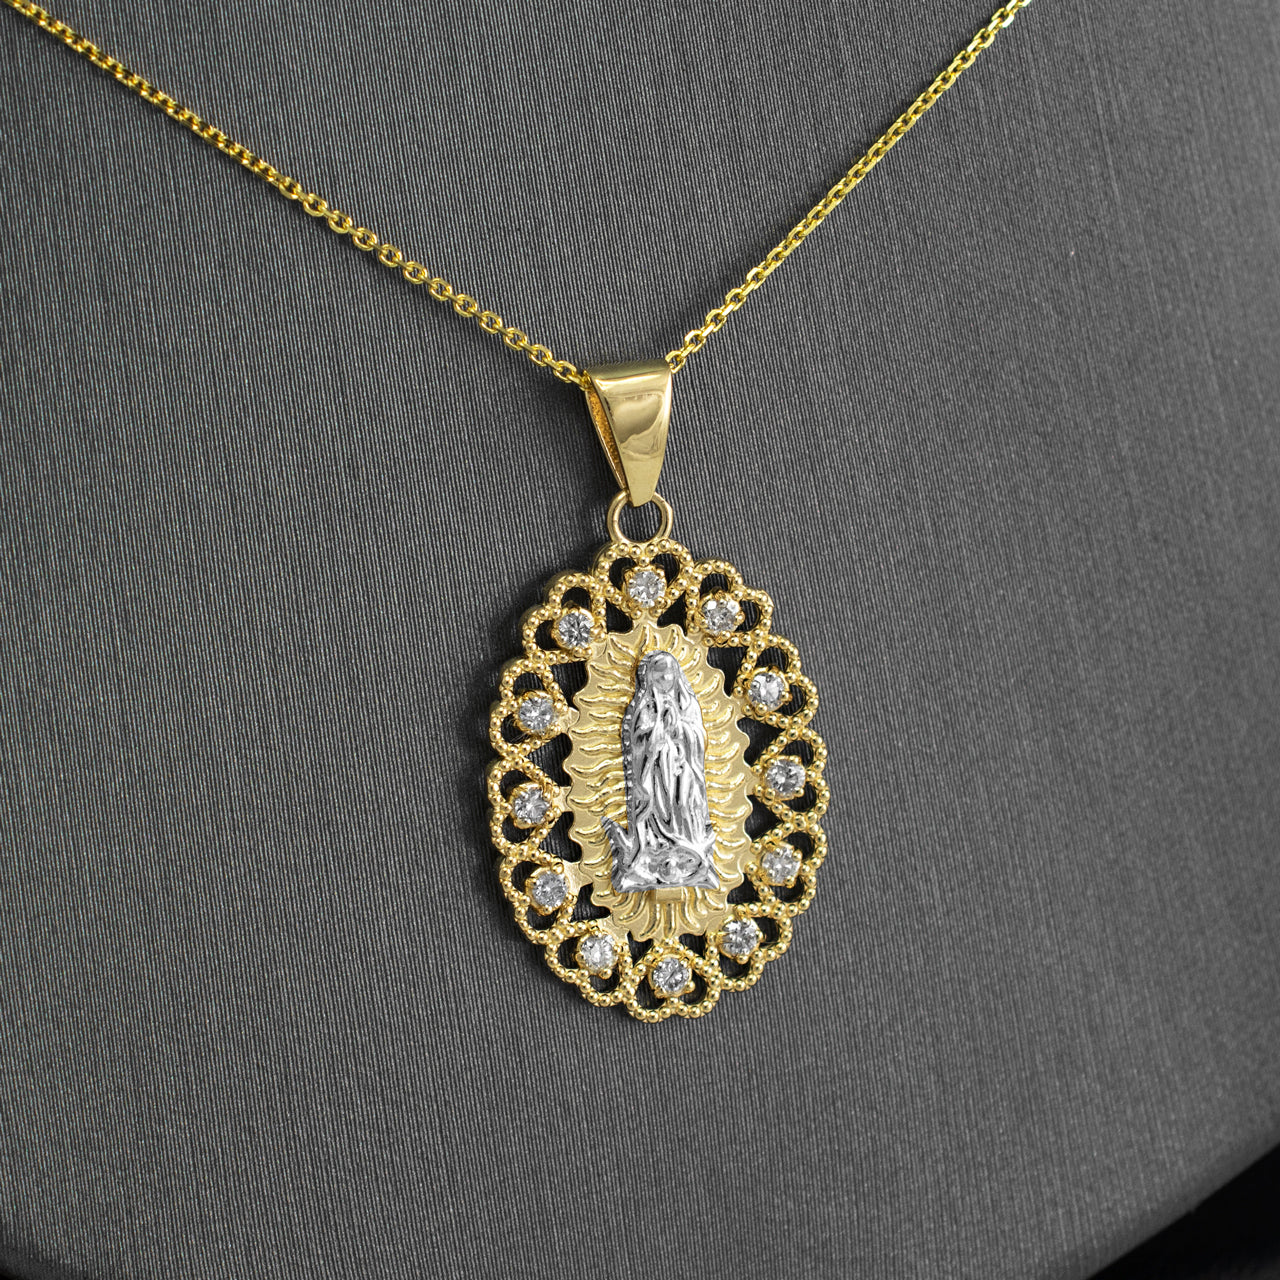 Gold Virgin Mary Our Lady of Guadalupe Filigree CZ Pendant Necklace Karma Blingz